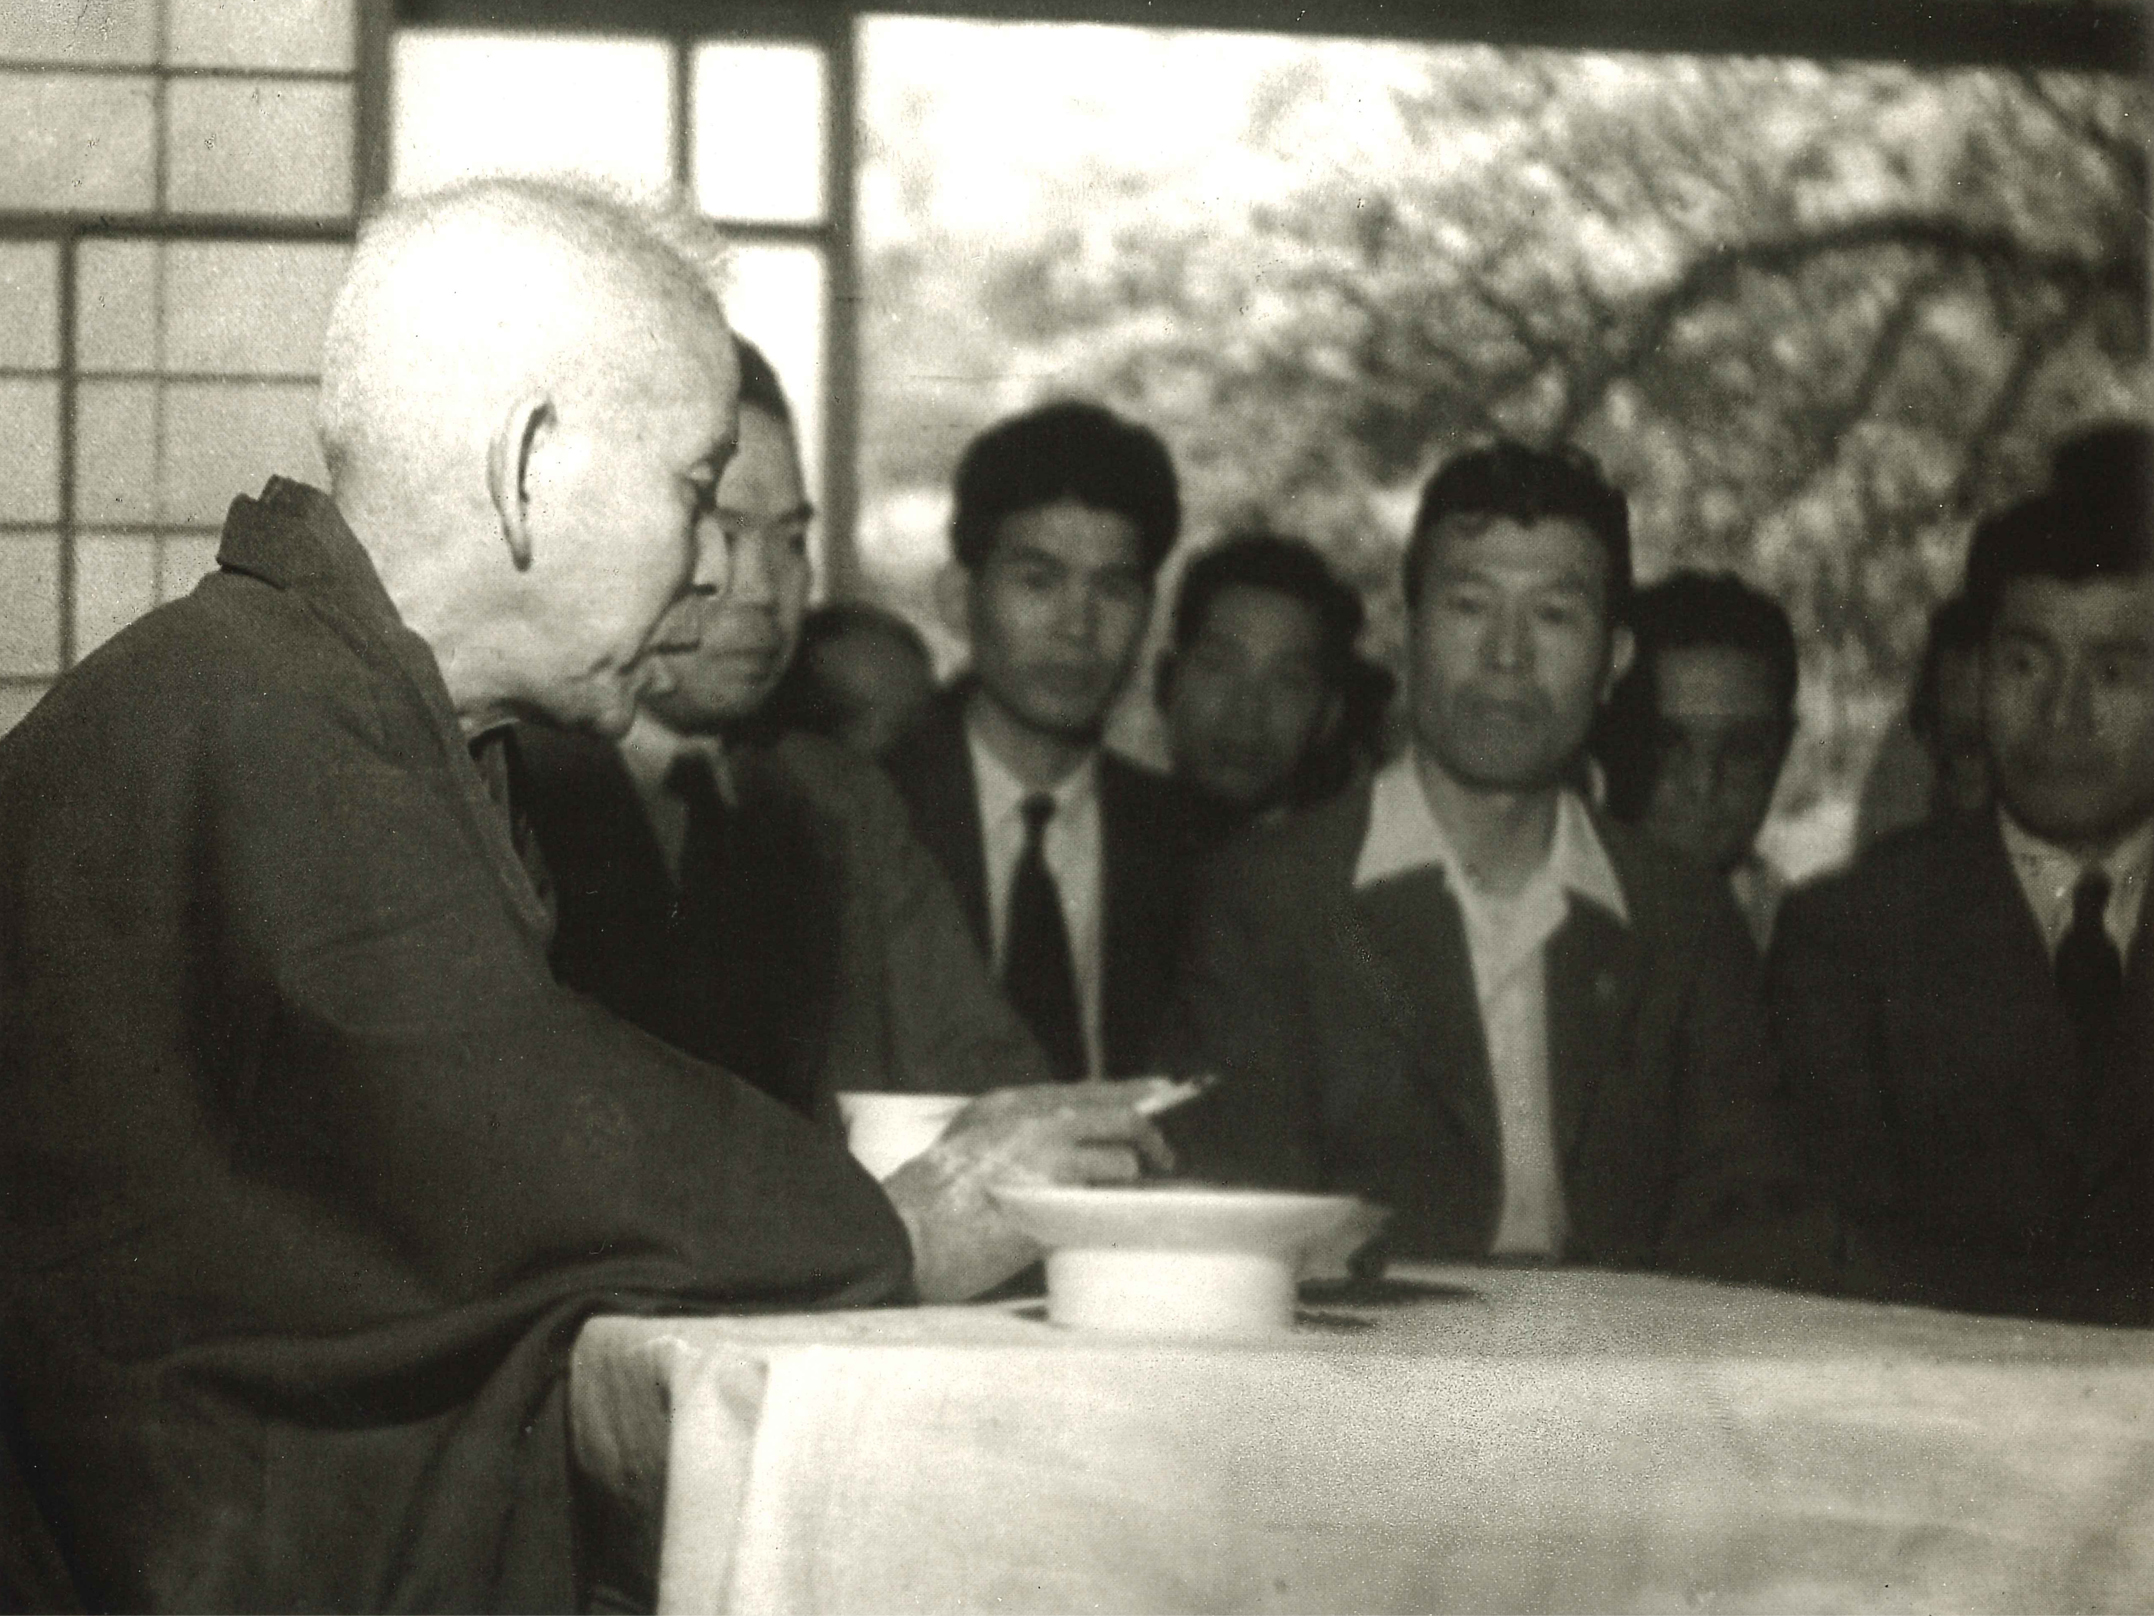 Okada, teaches intimately at his meeting with the members (around 1948)